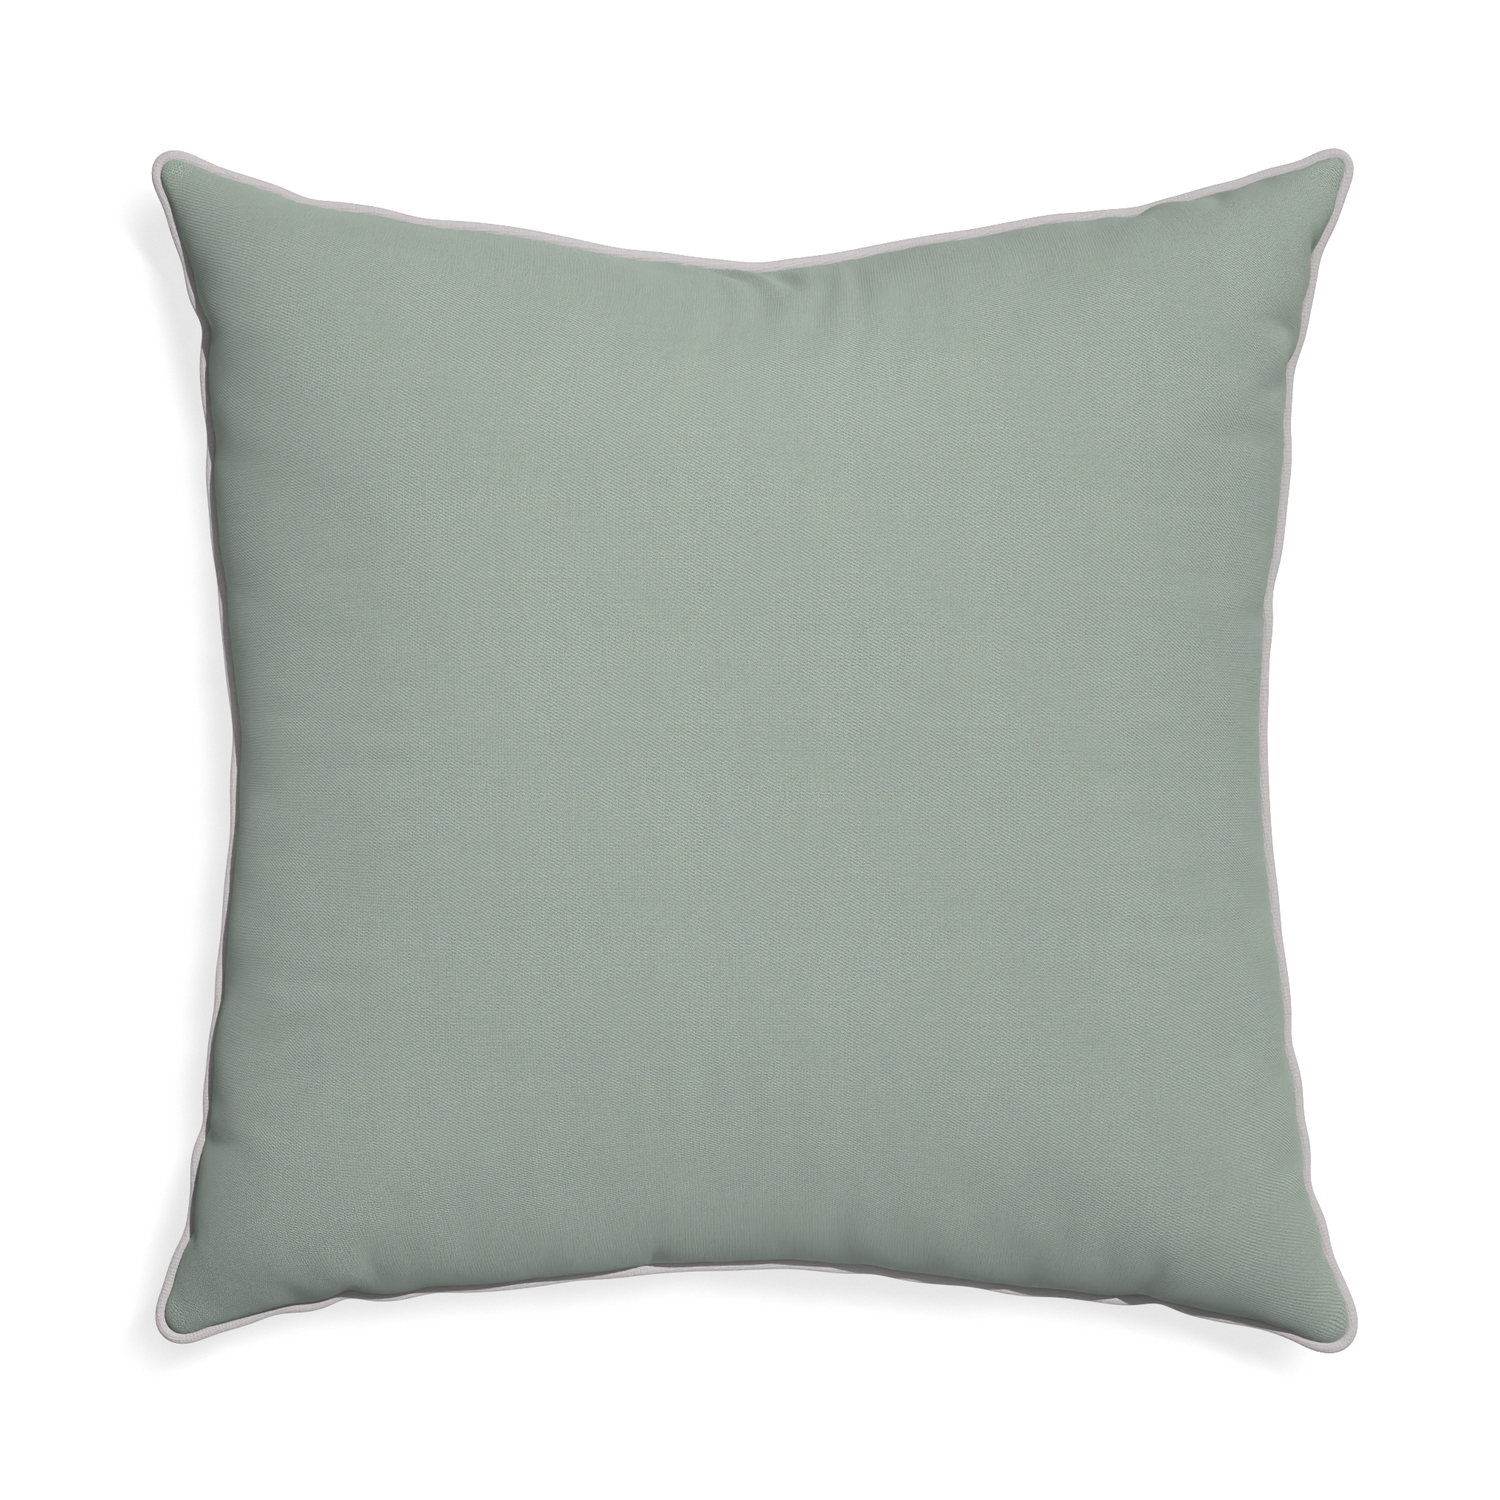 Euro-sham sage custom sage green cottonpillow with pebble piping on white background